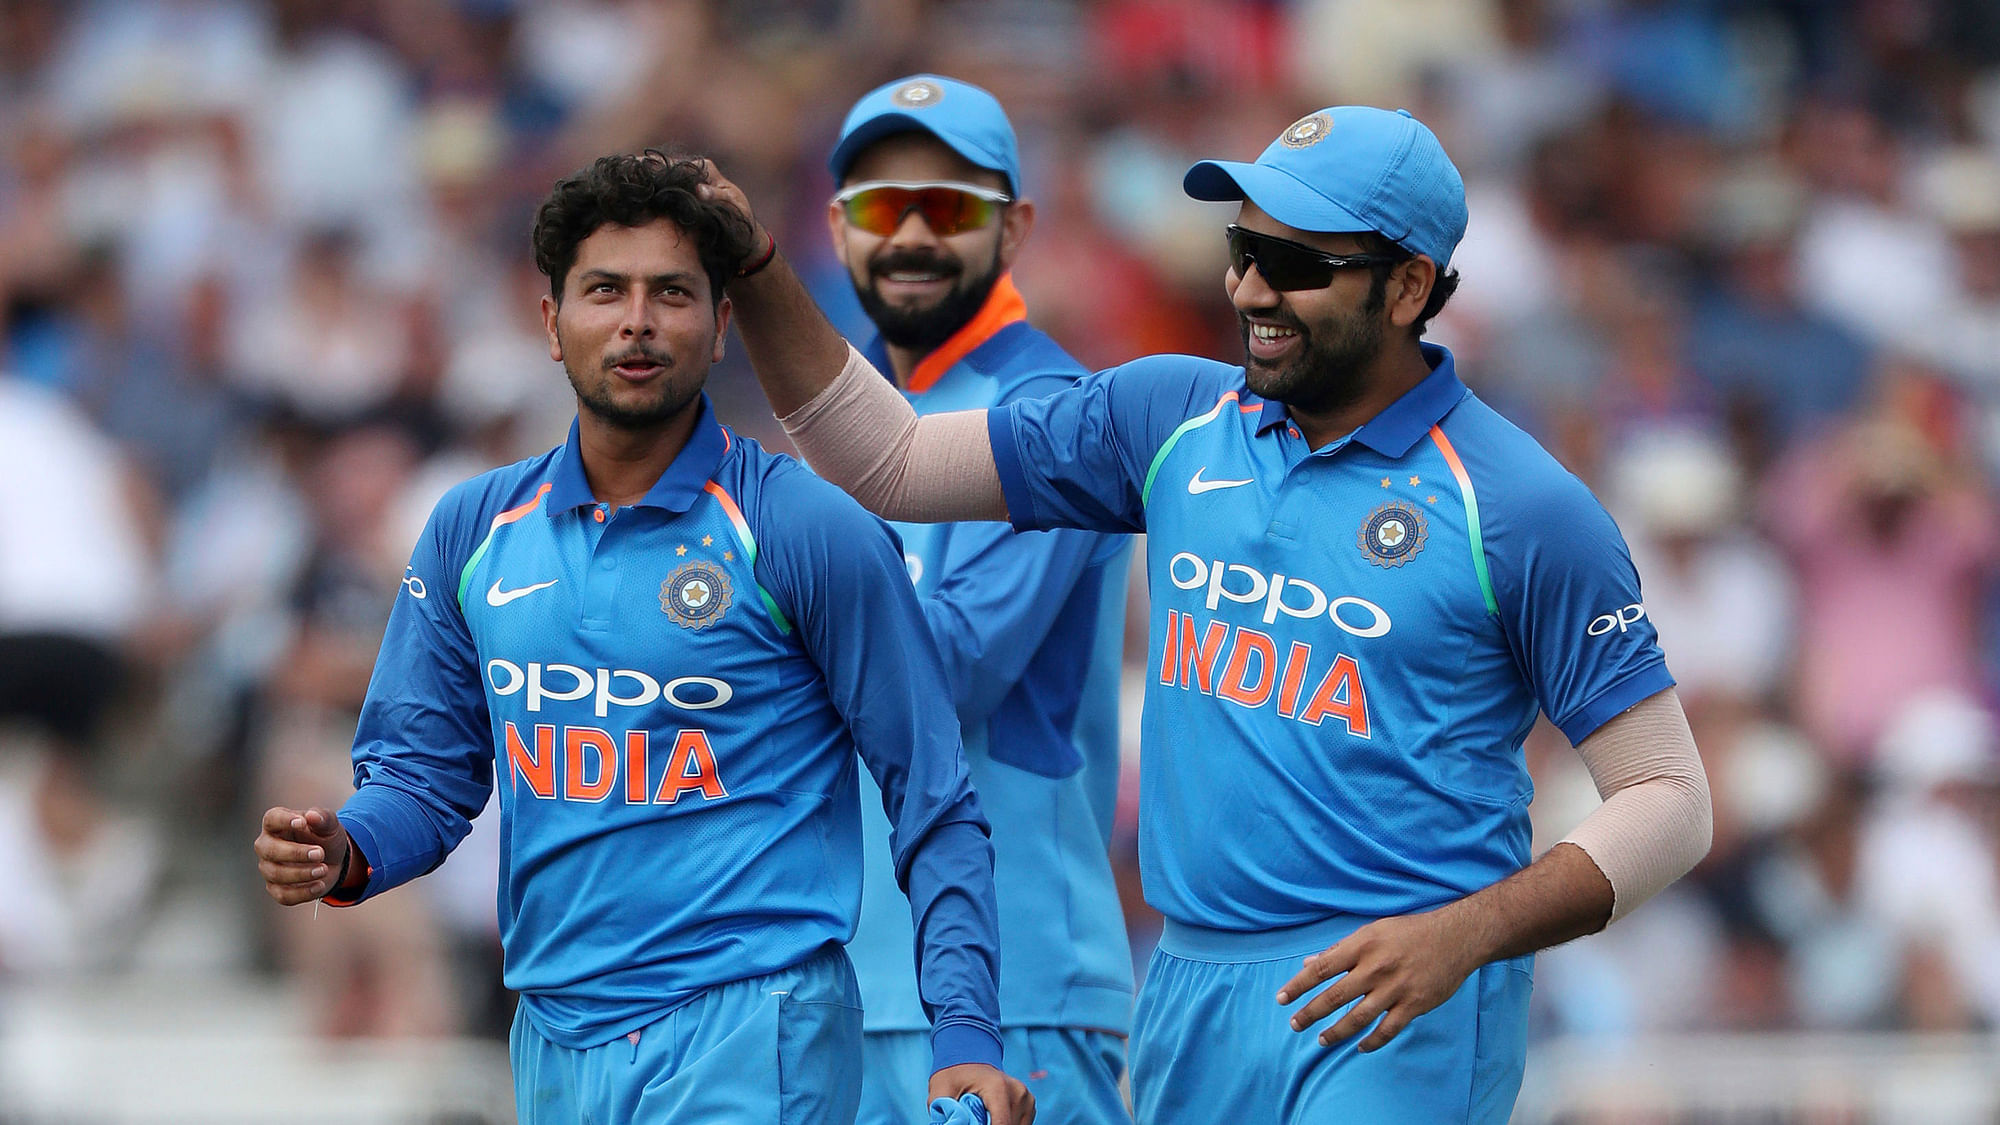 India captain Virat Kohli is tempted to play his ‘key weapons’ Kuldeep Yadav and Yuzvendra Chahal in the upcoming five-Test series against England.